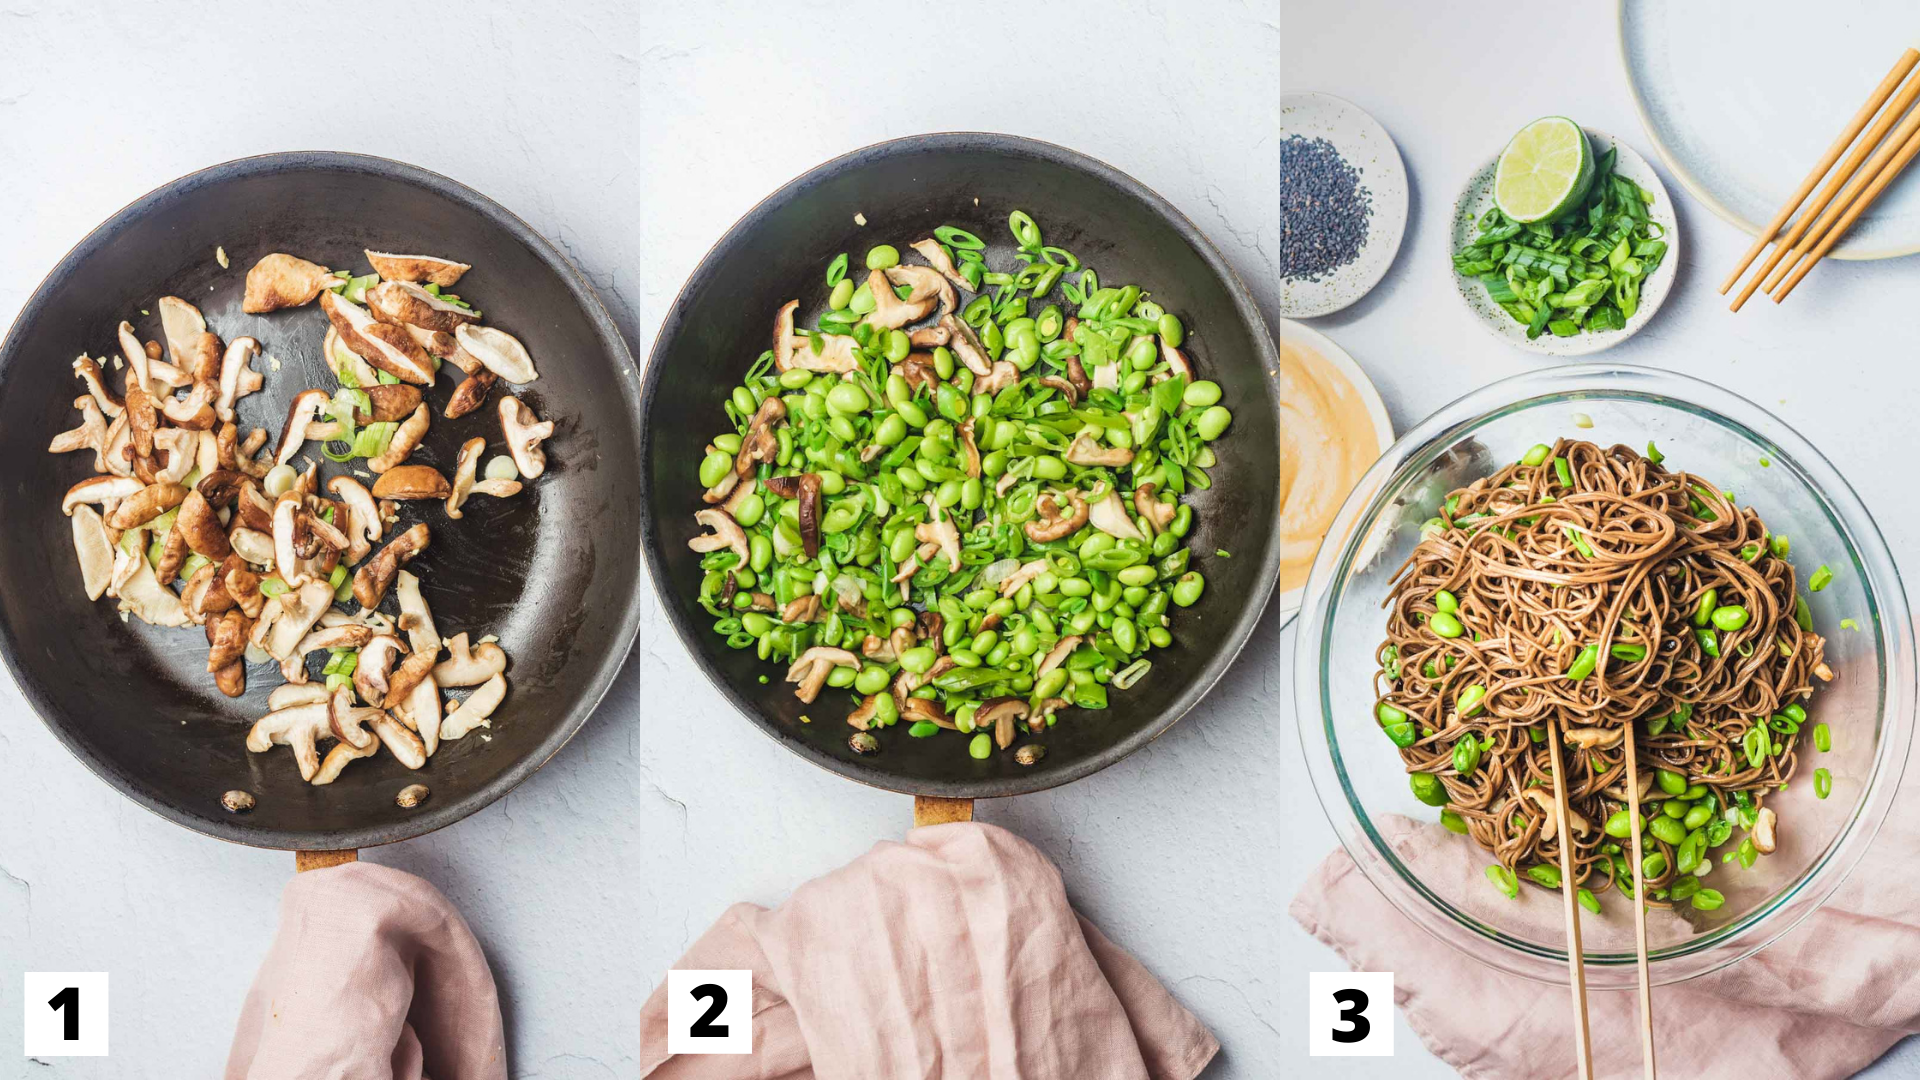 Birds eye view of 3 steps on how to make the recipe.